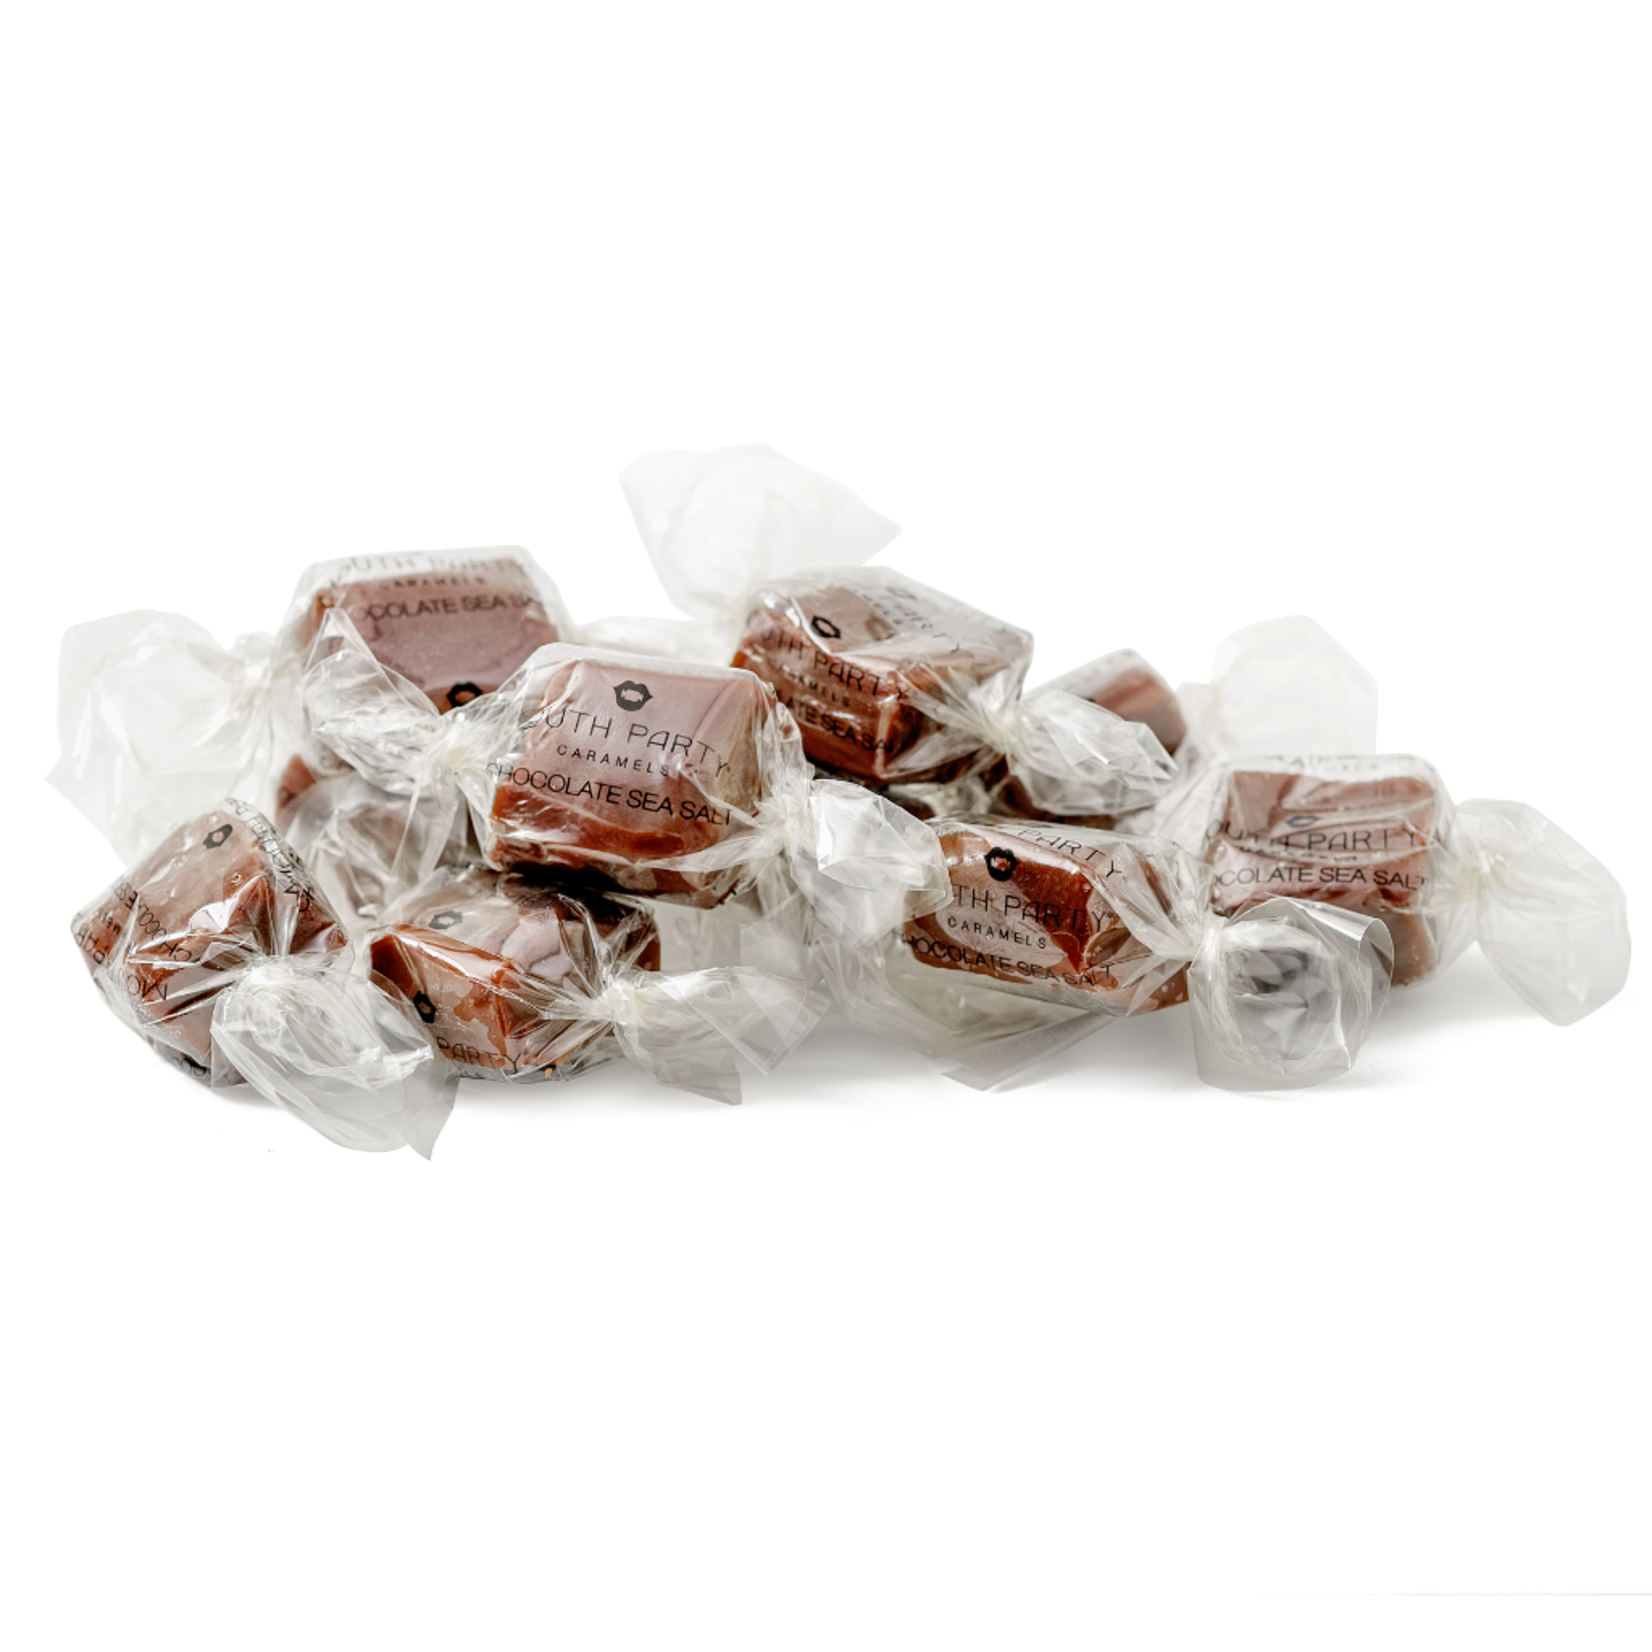 Mouth Party Chocolate Sea Salt 1/2 lb. Gift Box